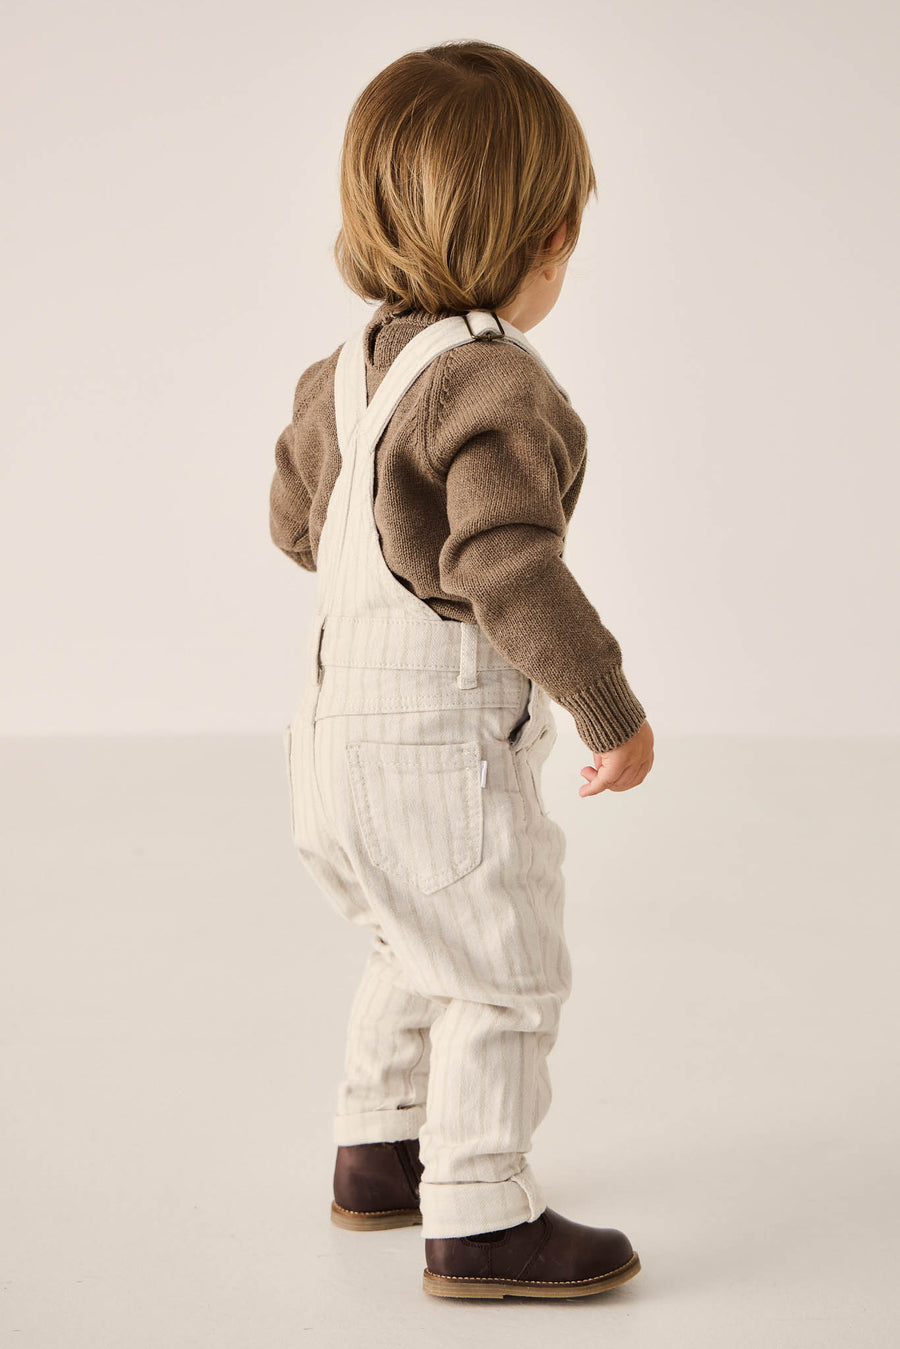 Arlo Overall - Cassava/Soft Clay Childrens Overall from Jamie Kay NZ